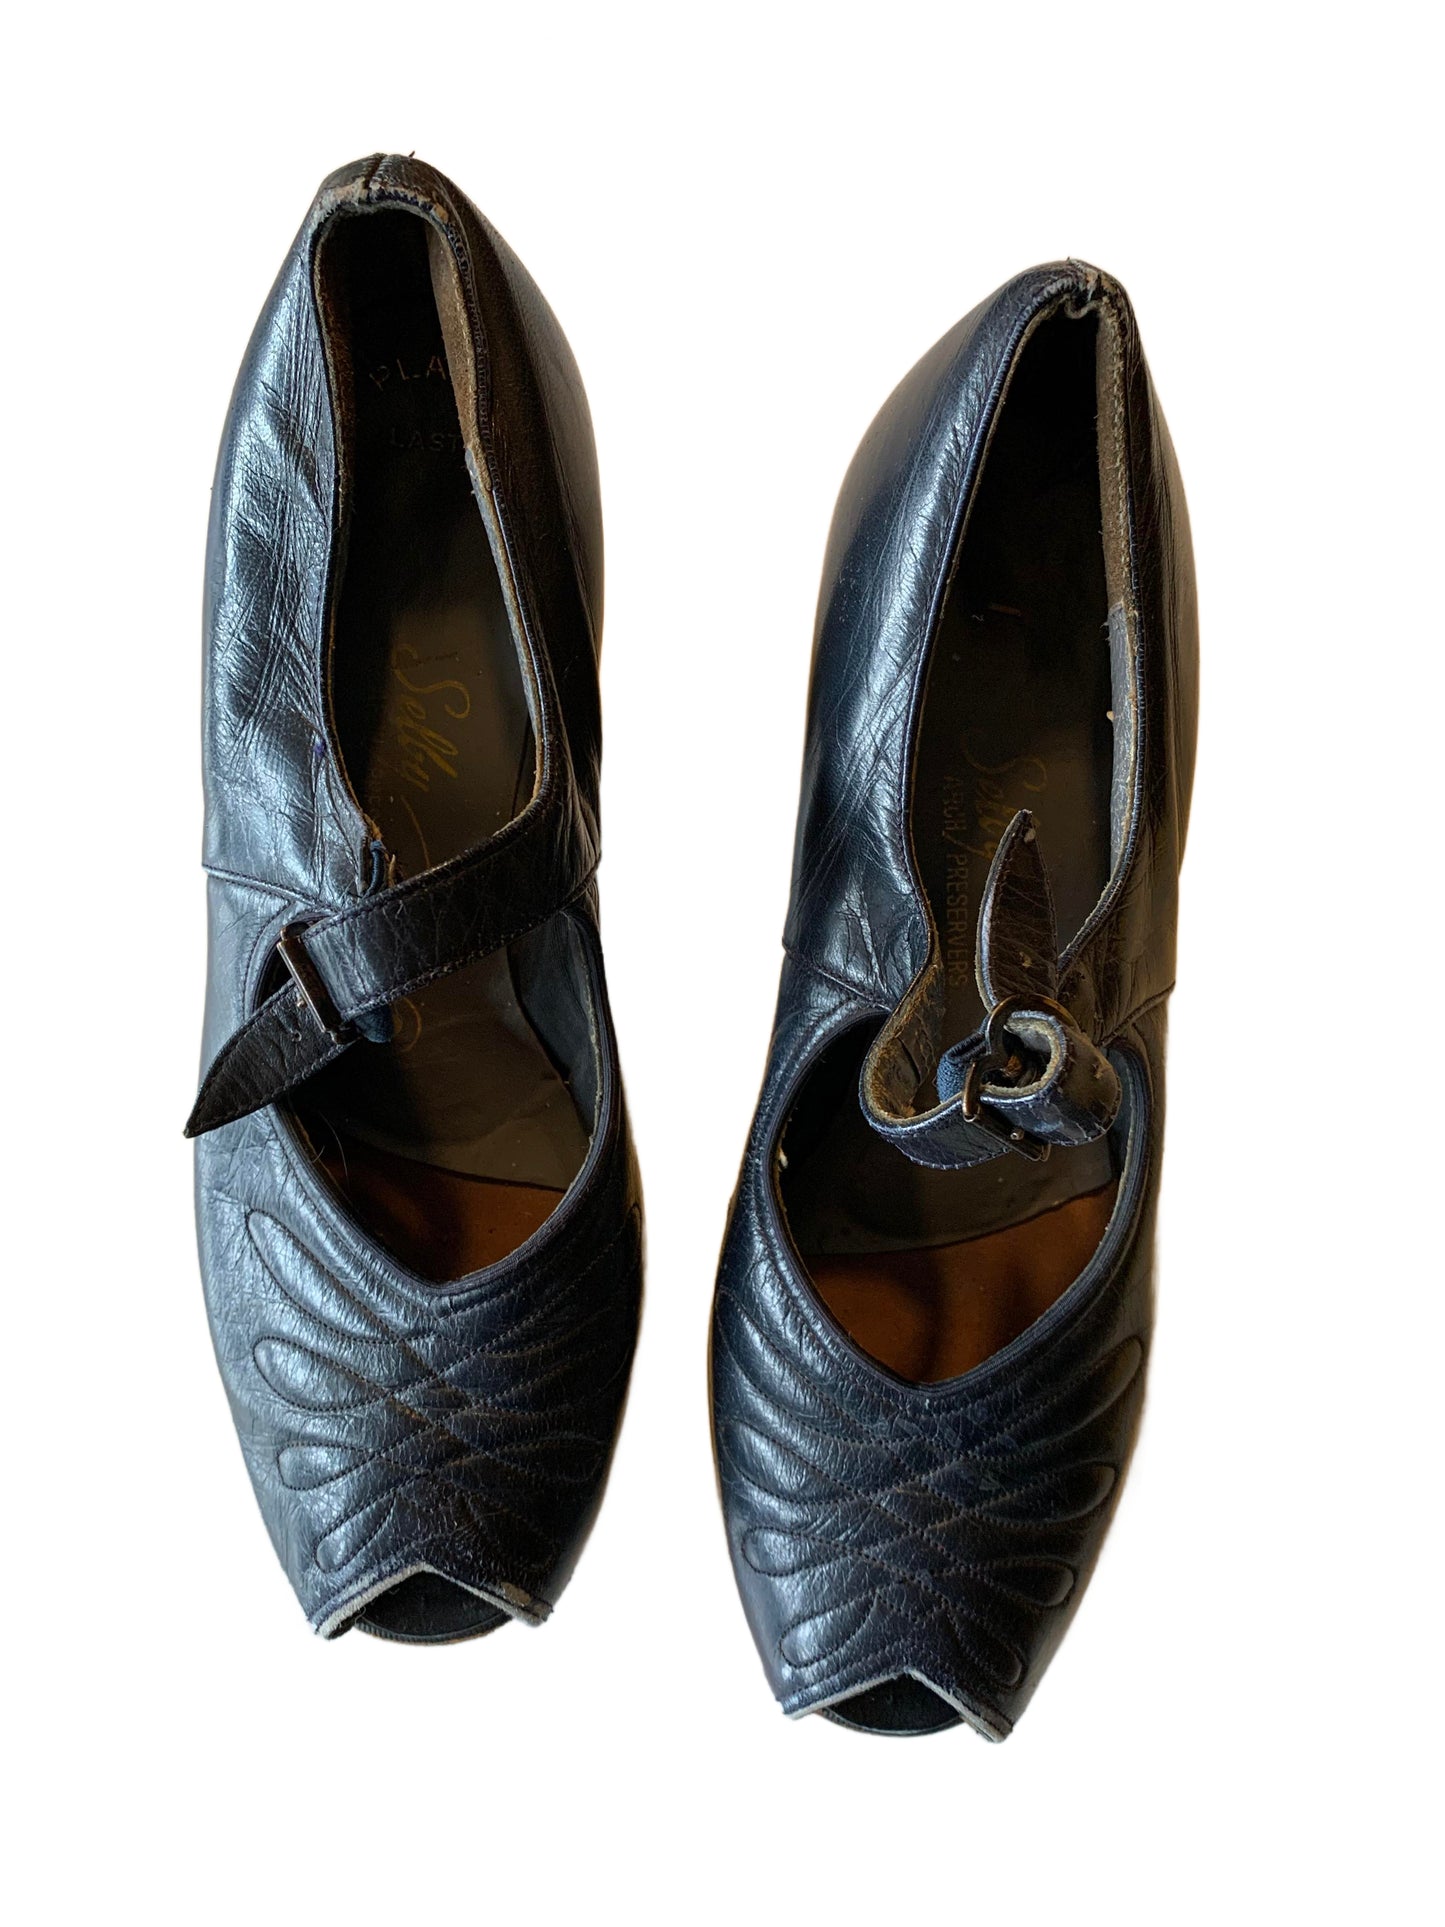 Blue Leather Top Stitched Low Heel Peep Toe Shoes circa 1940s 6